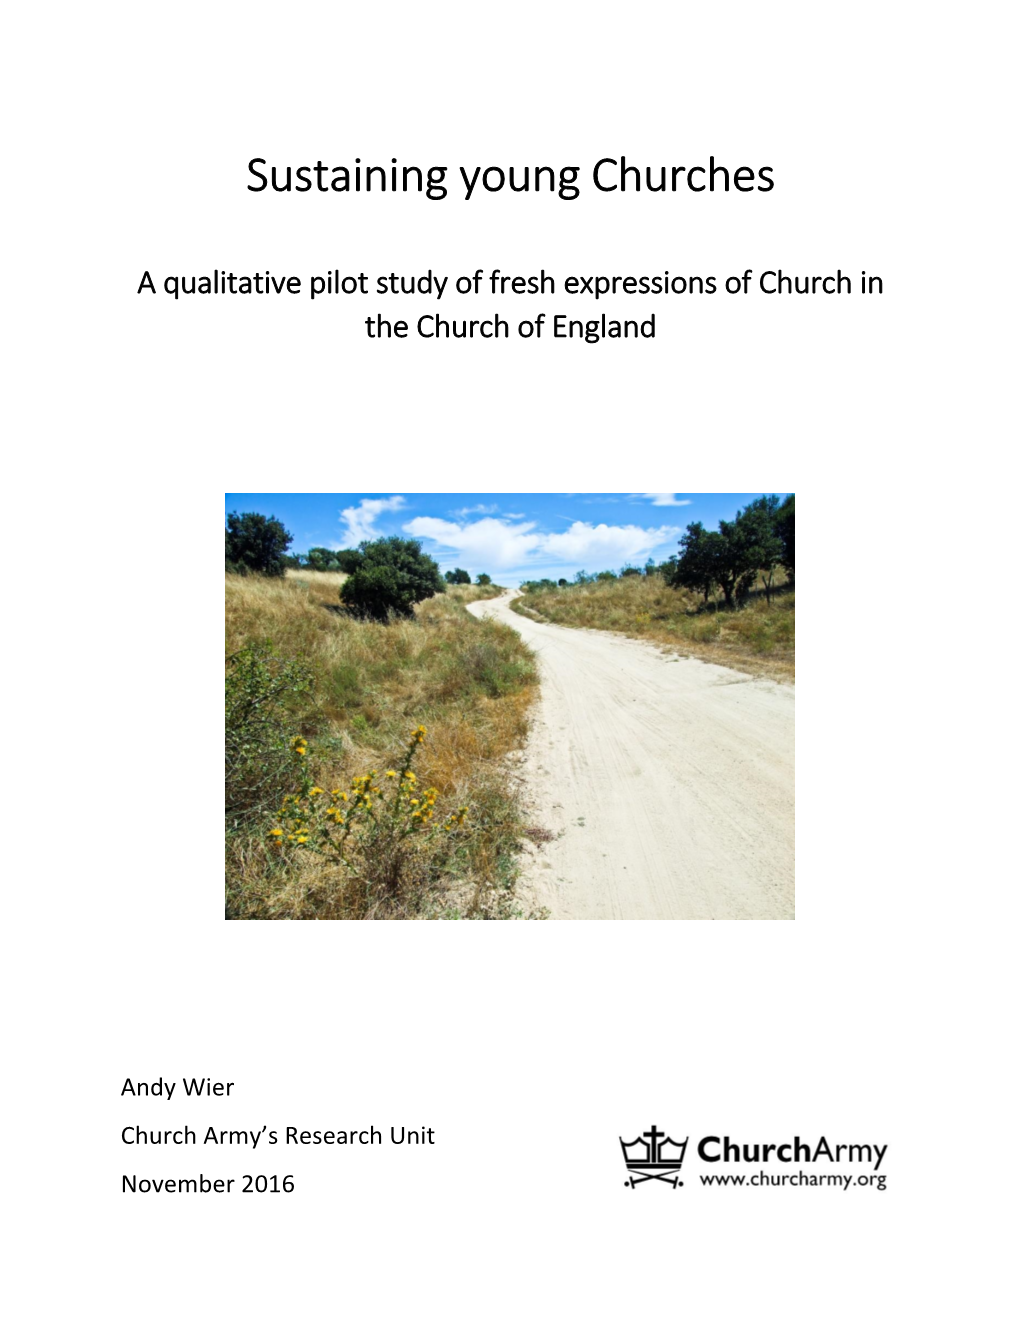 Sustaining Young Churches